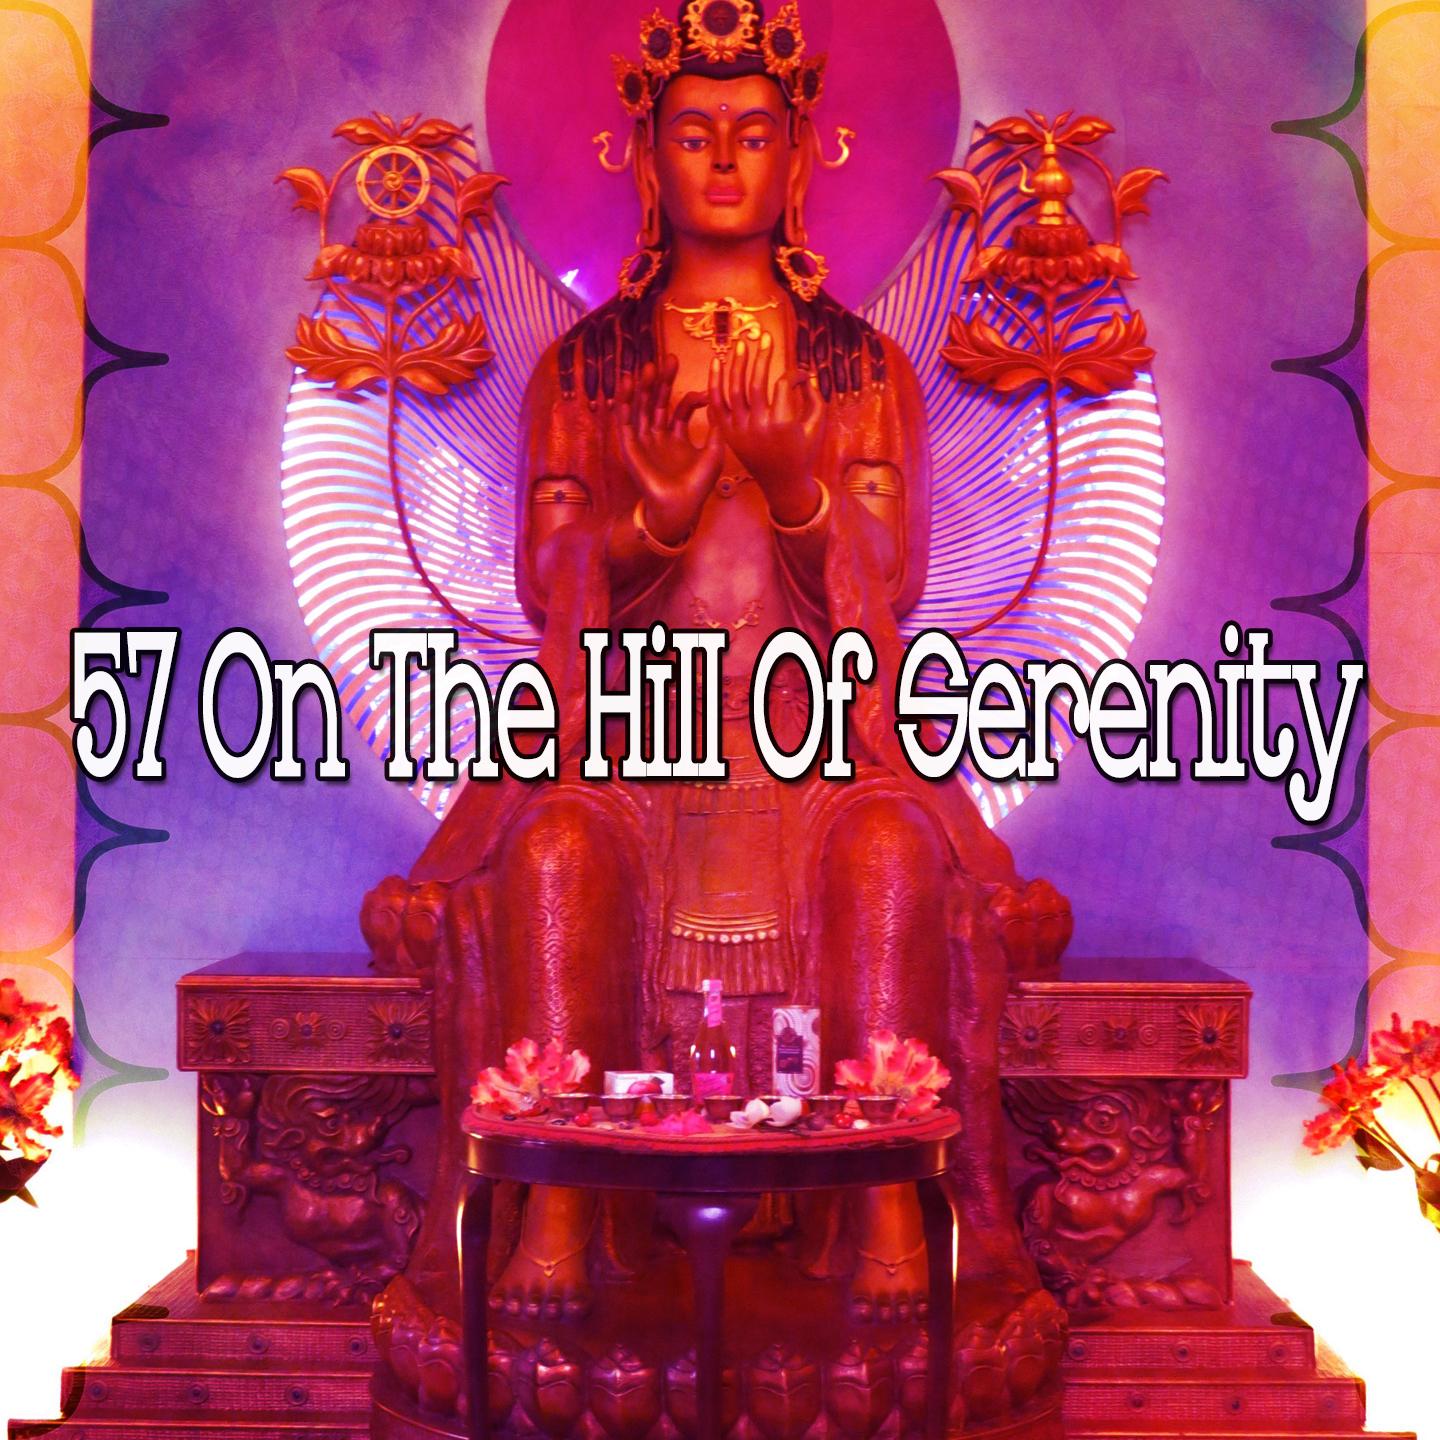 57 On the Hill of Serenity